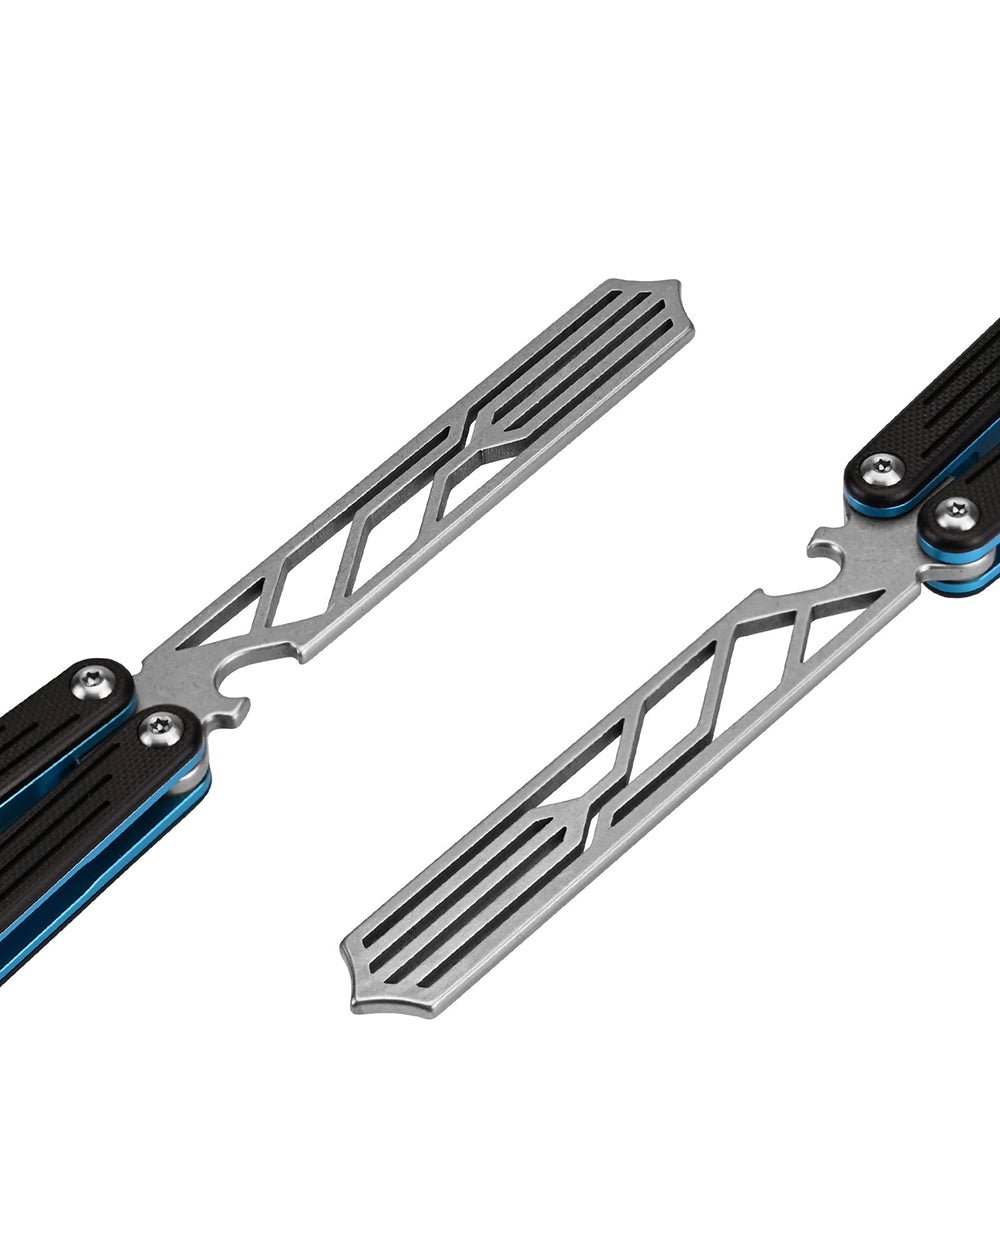 Nabalis Trident Butterfly Knife Balisong Trainer-Blade